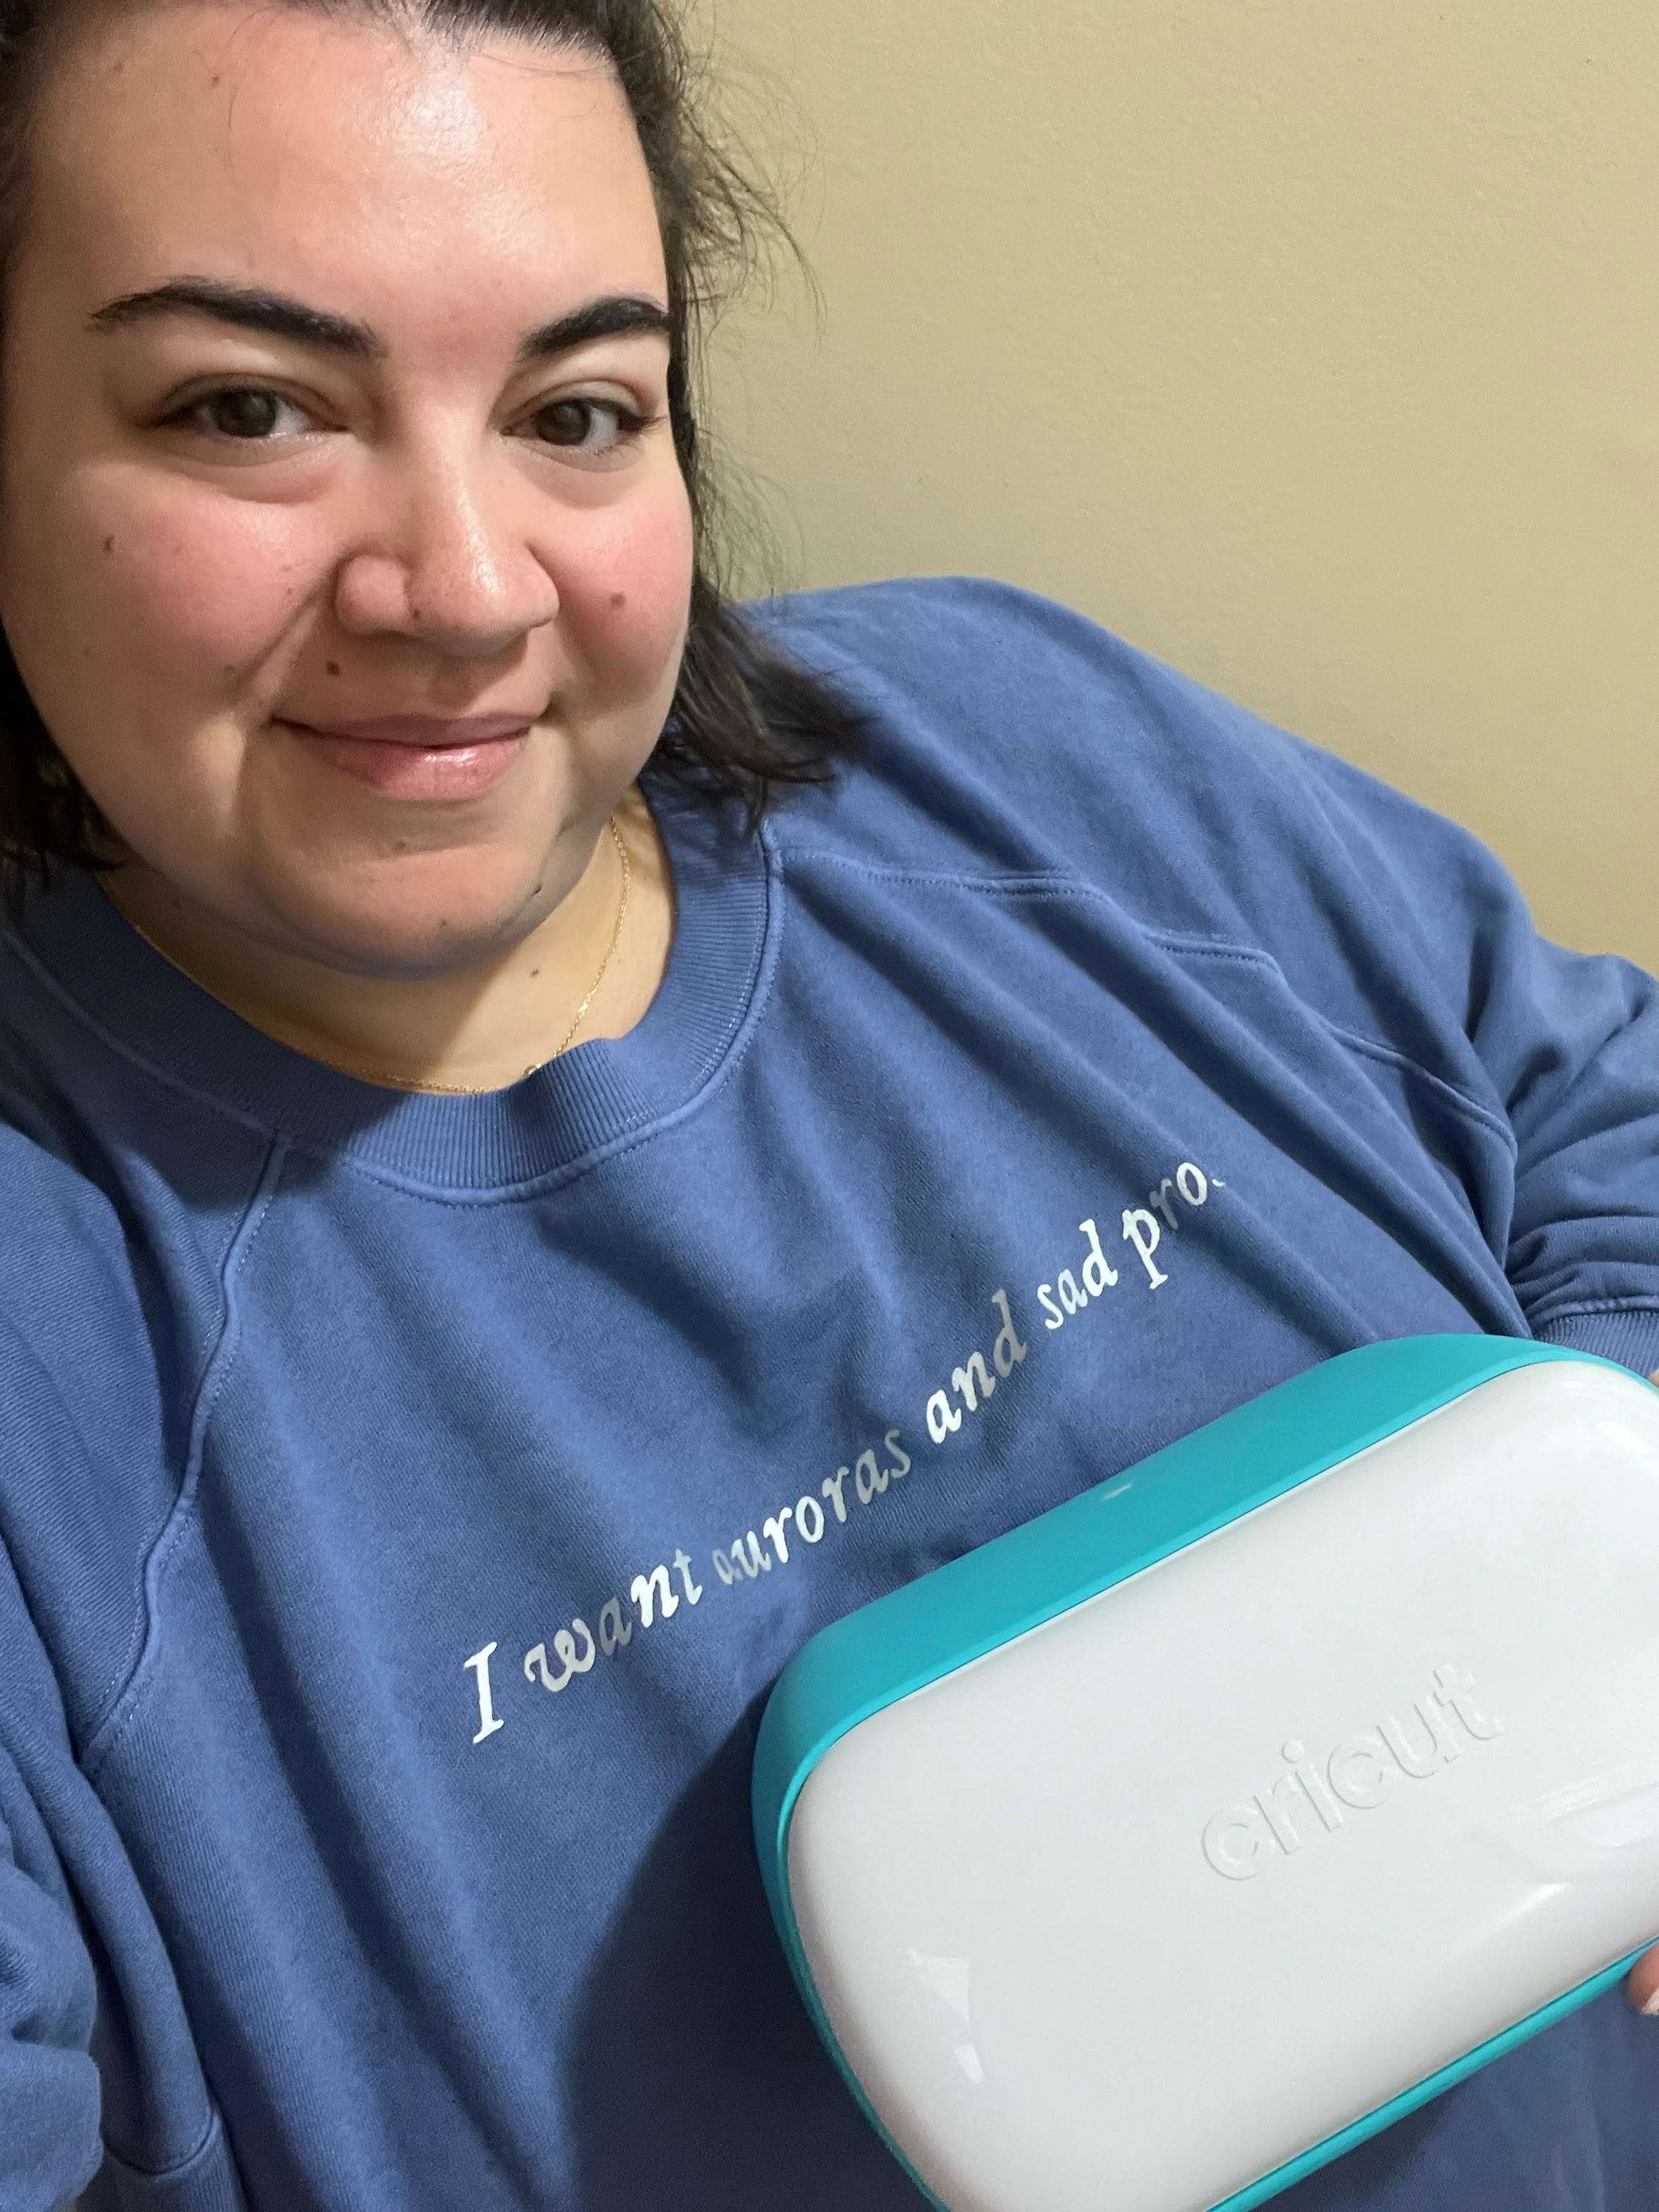 Bianca holding up a Cricut machine while wearing a sweater she made with it